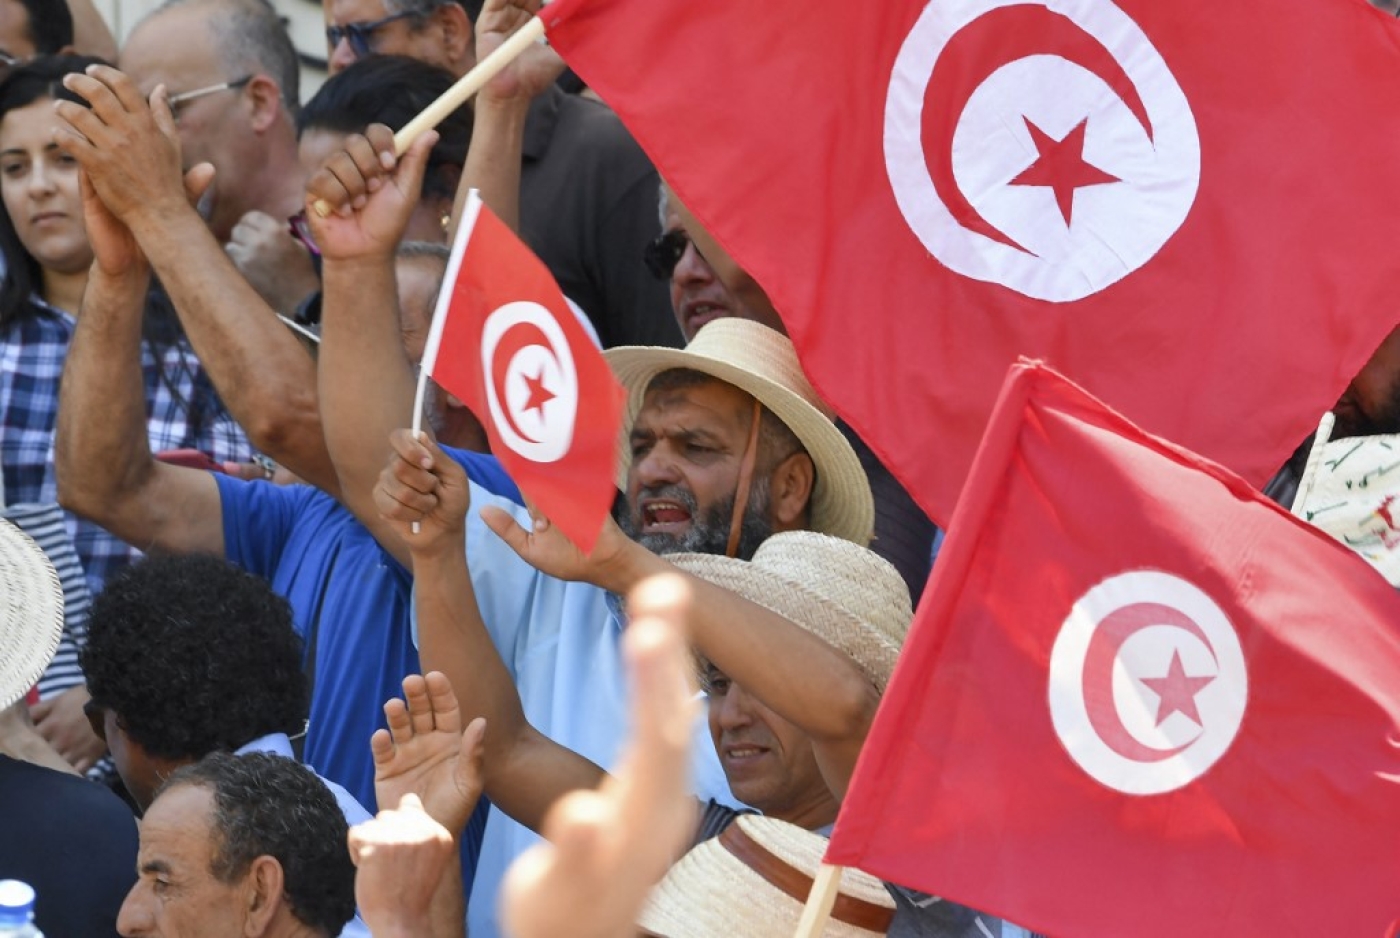 Tunisian protesters chant slogans against President Kais Saied and the upcoming constitutional referendum to be held on 25 July, at a rally in the capital Tunis, 19 June 2022 (AFP)